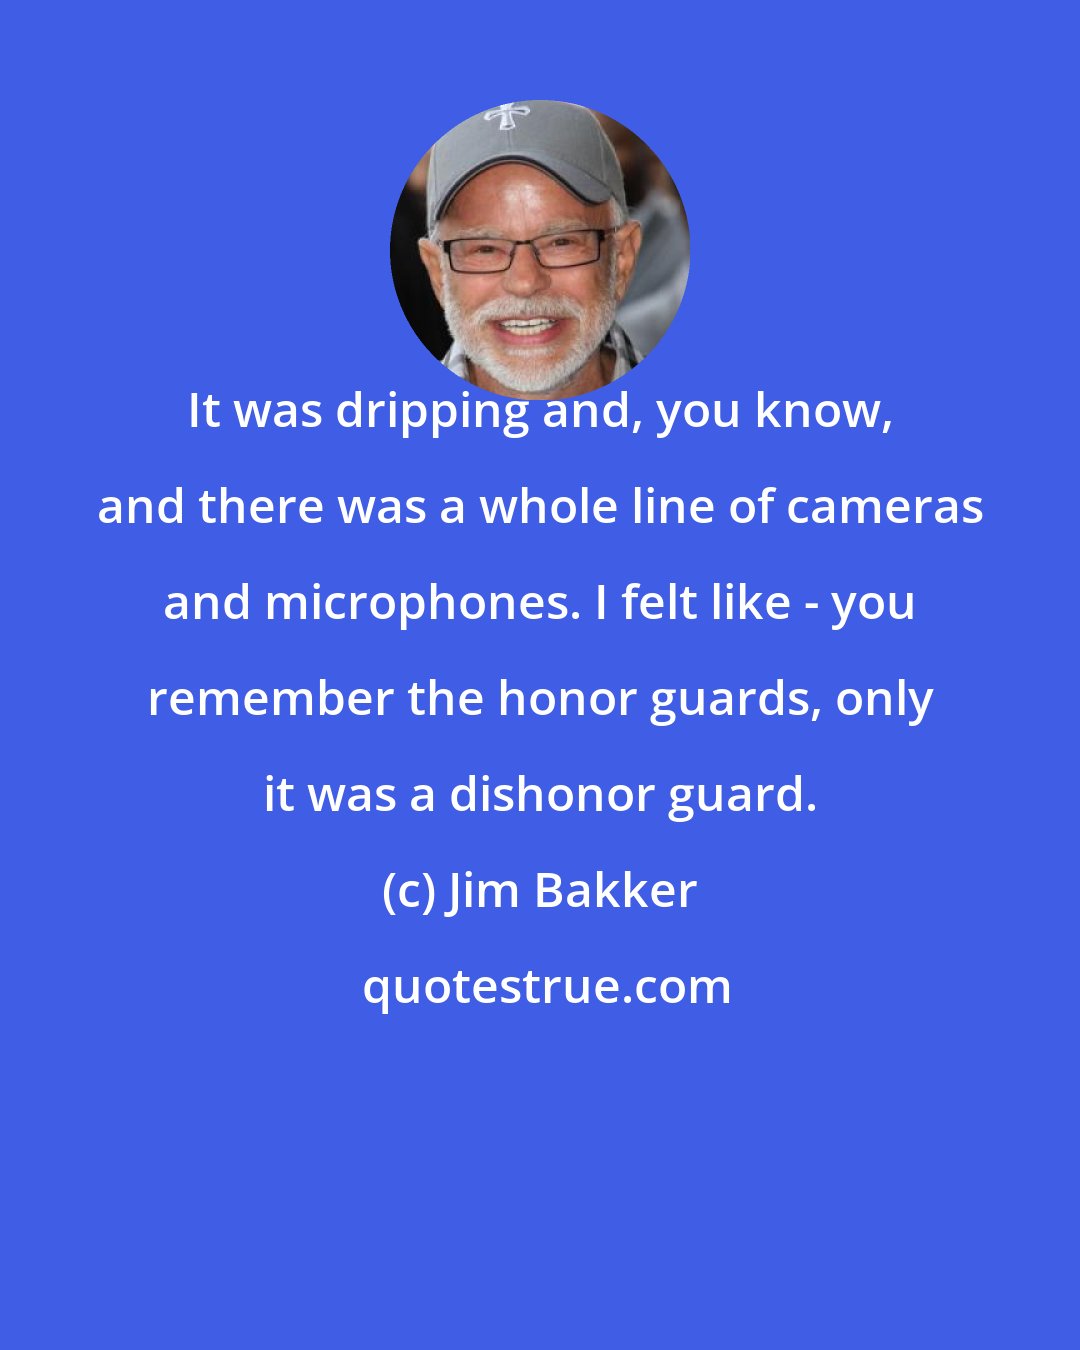 Jim Bakker: It was dripping and, you know, and there was a whole line of cameras and microphones. I felt like - you remember the honor guards, only it was a dishonor guard.